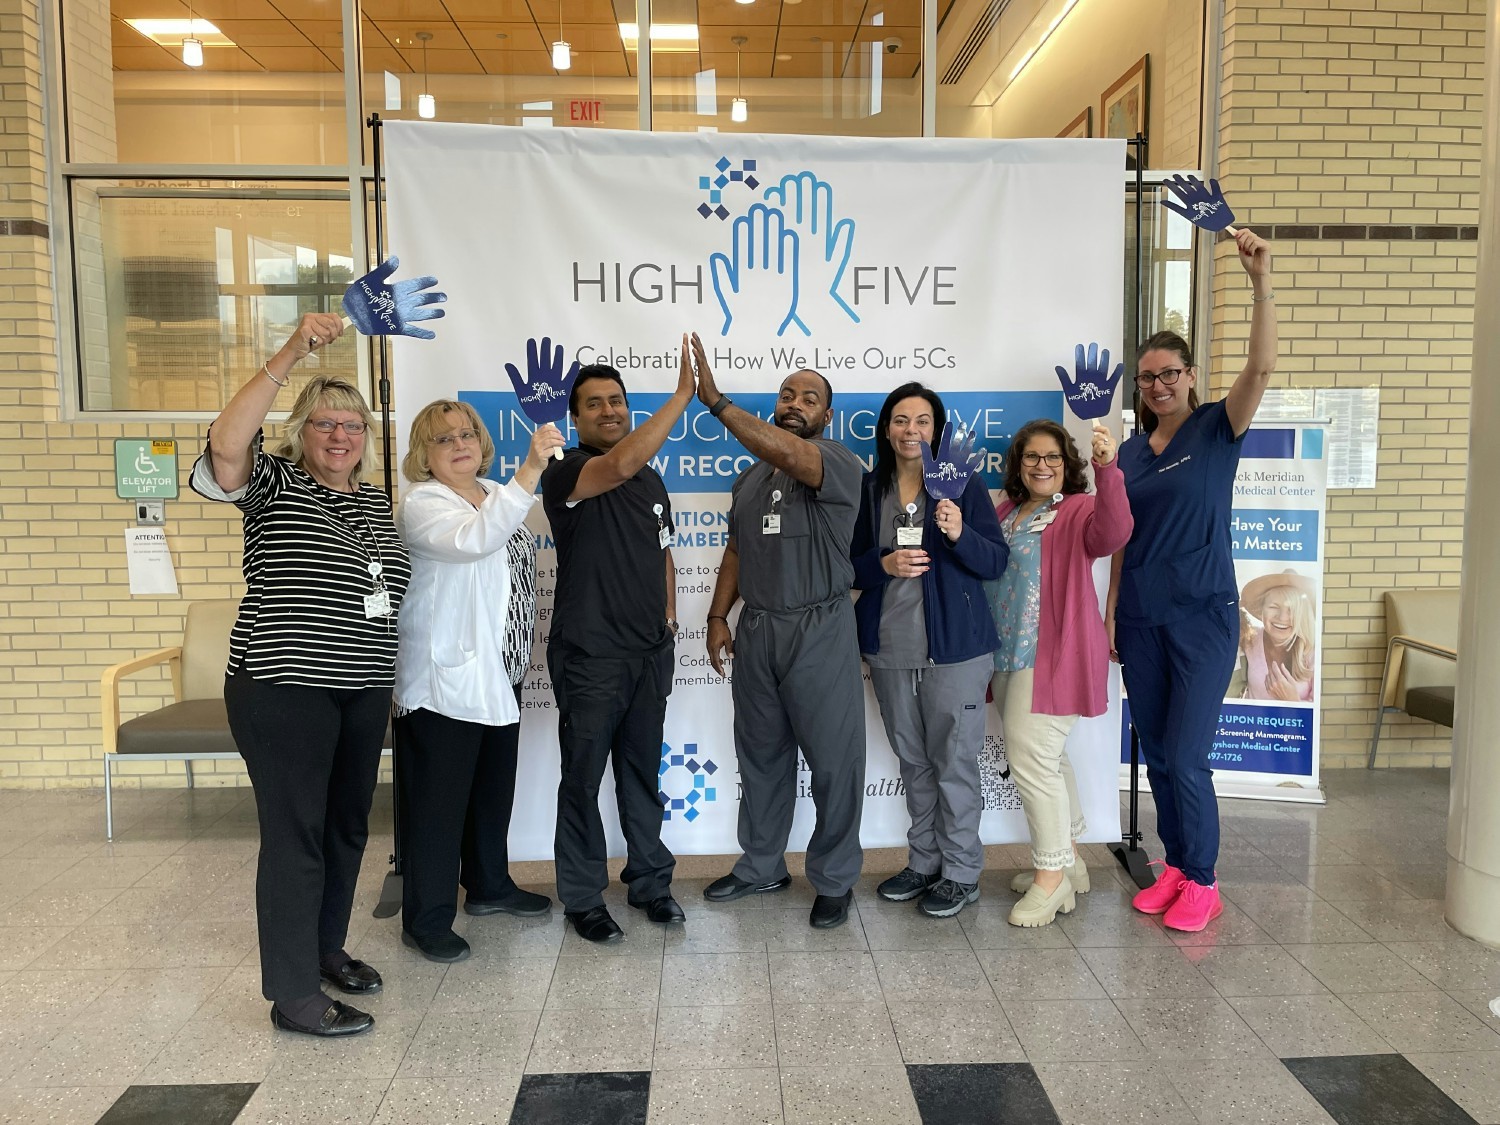 Team members celebrate the launch of our new recognition platform, High Five!